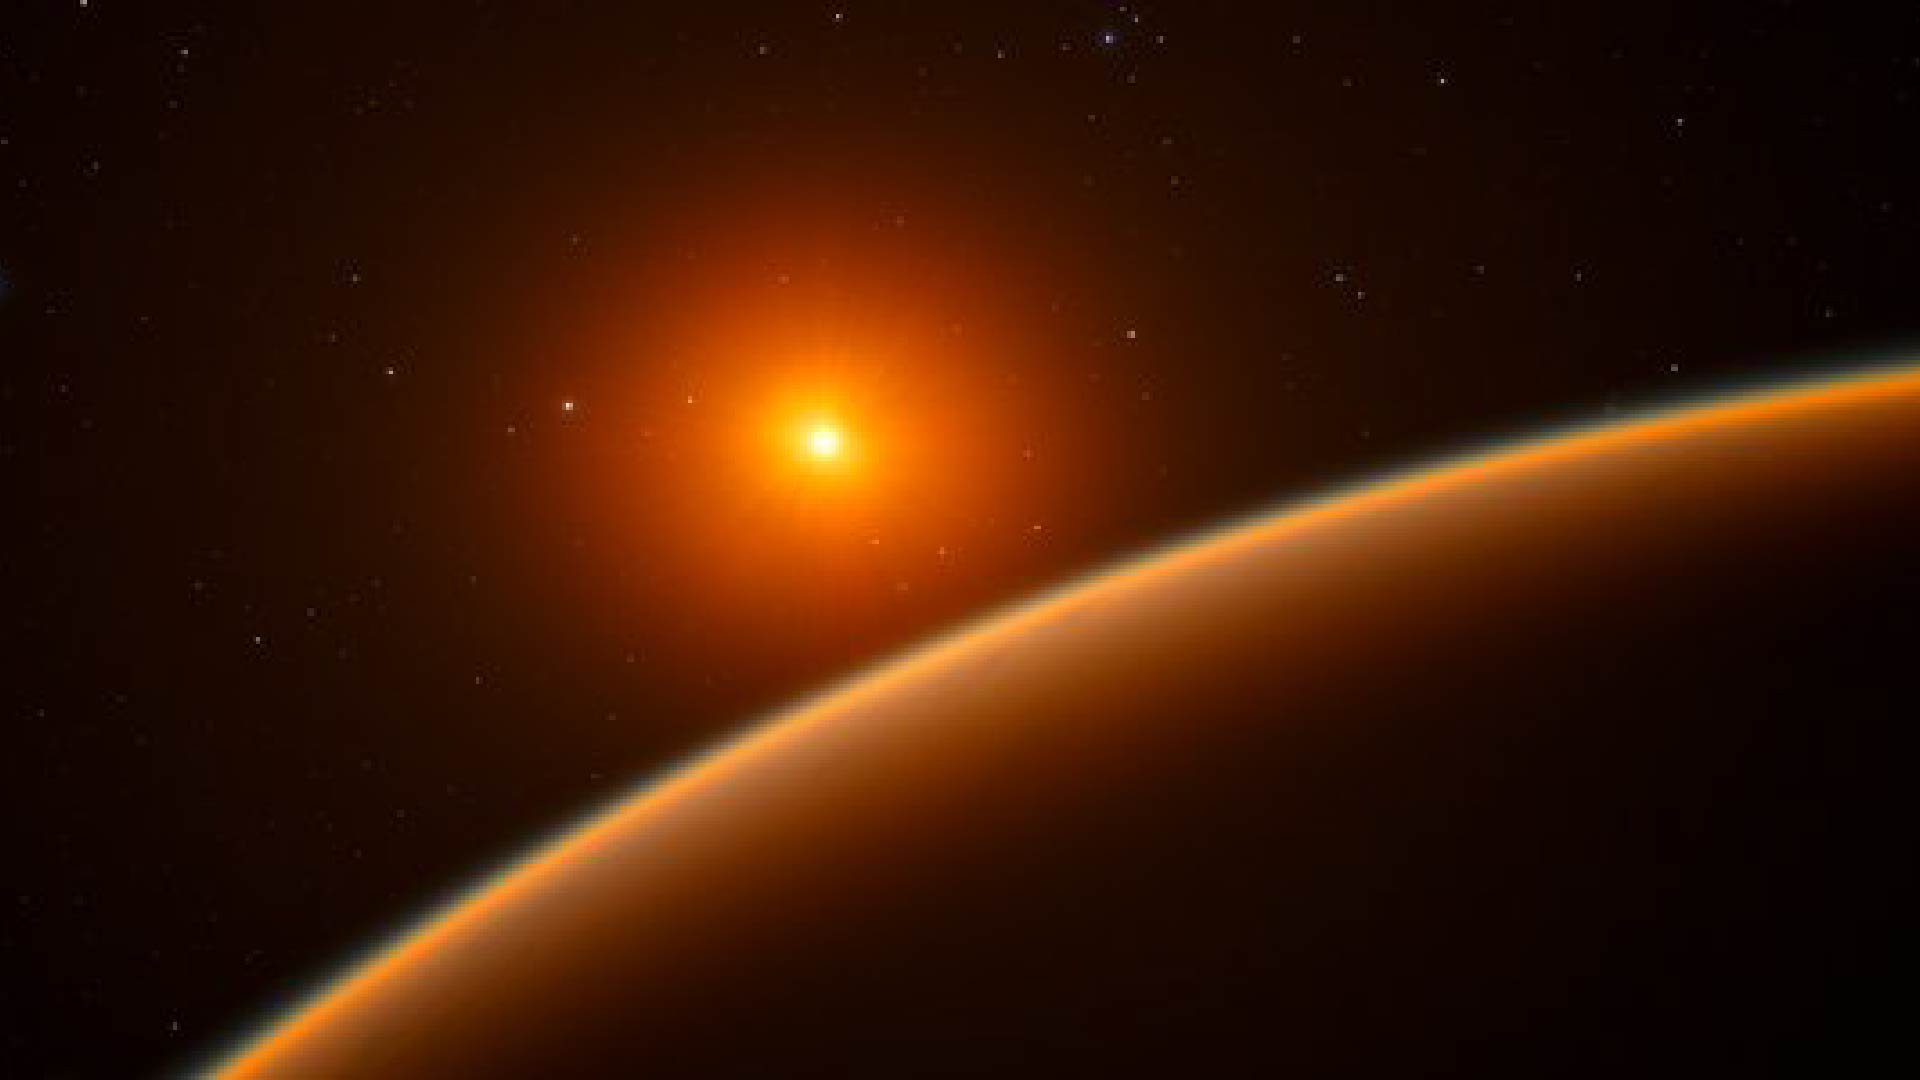 An artist's rendering of LHS 1140 b. It is an orange planet lit by a star in the background.